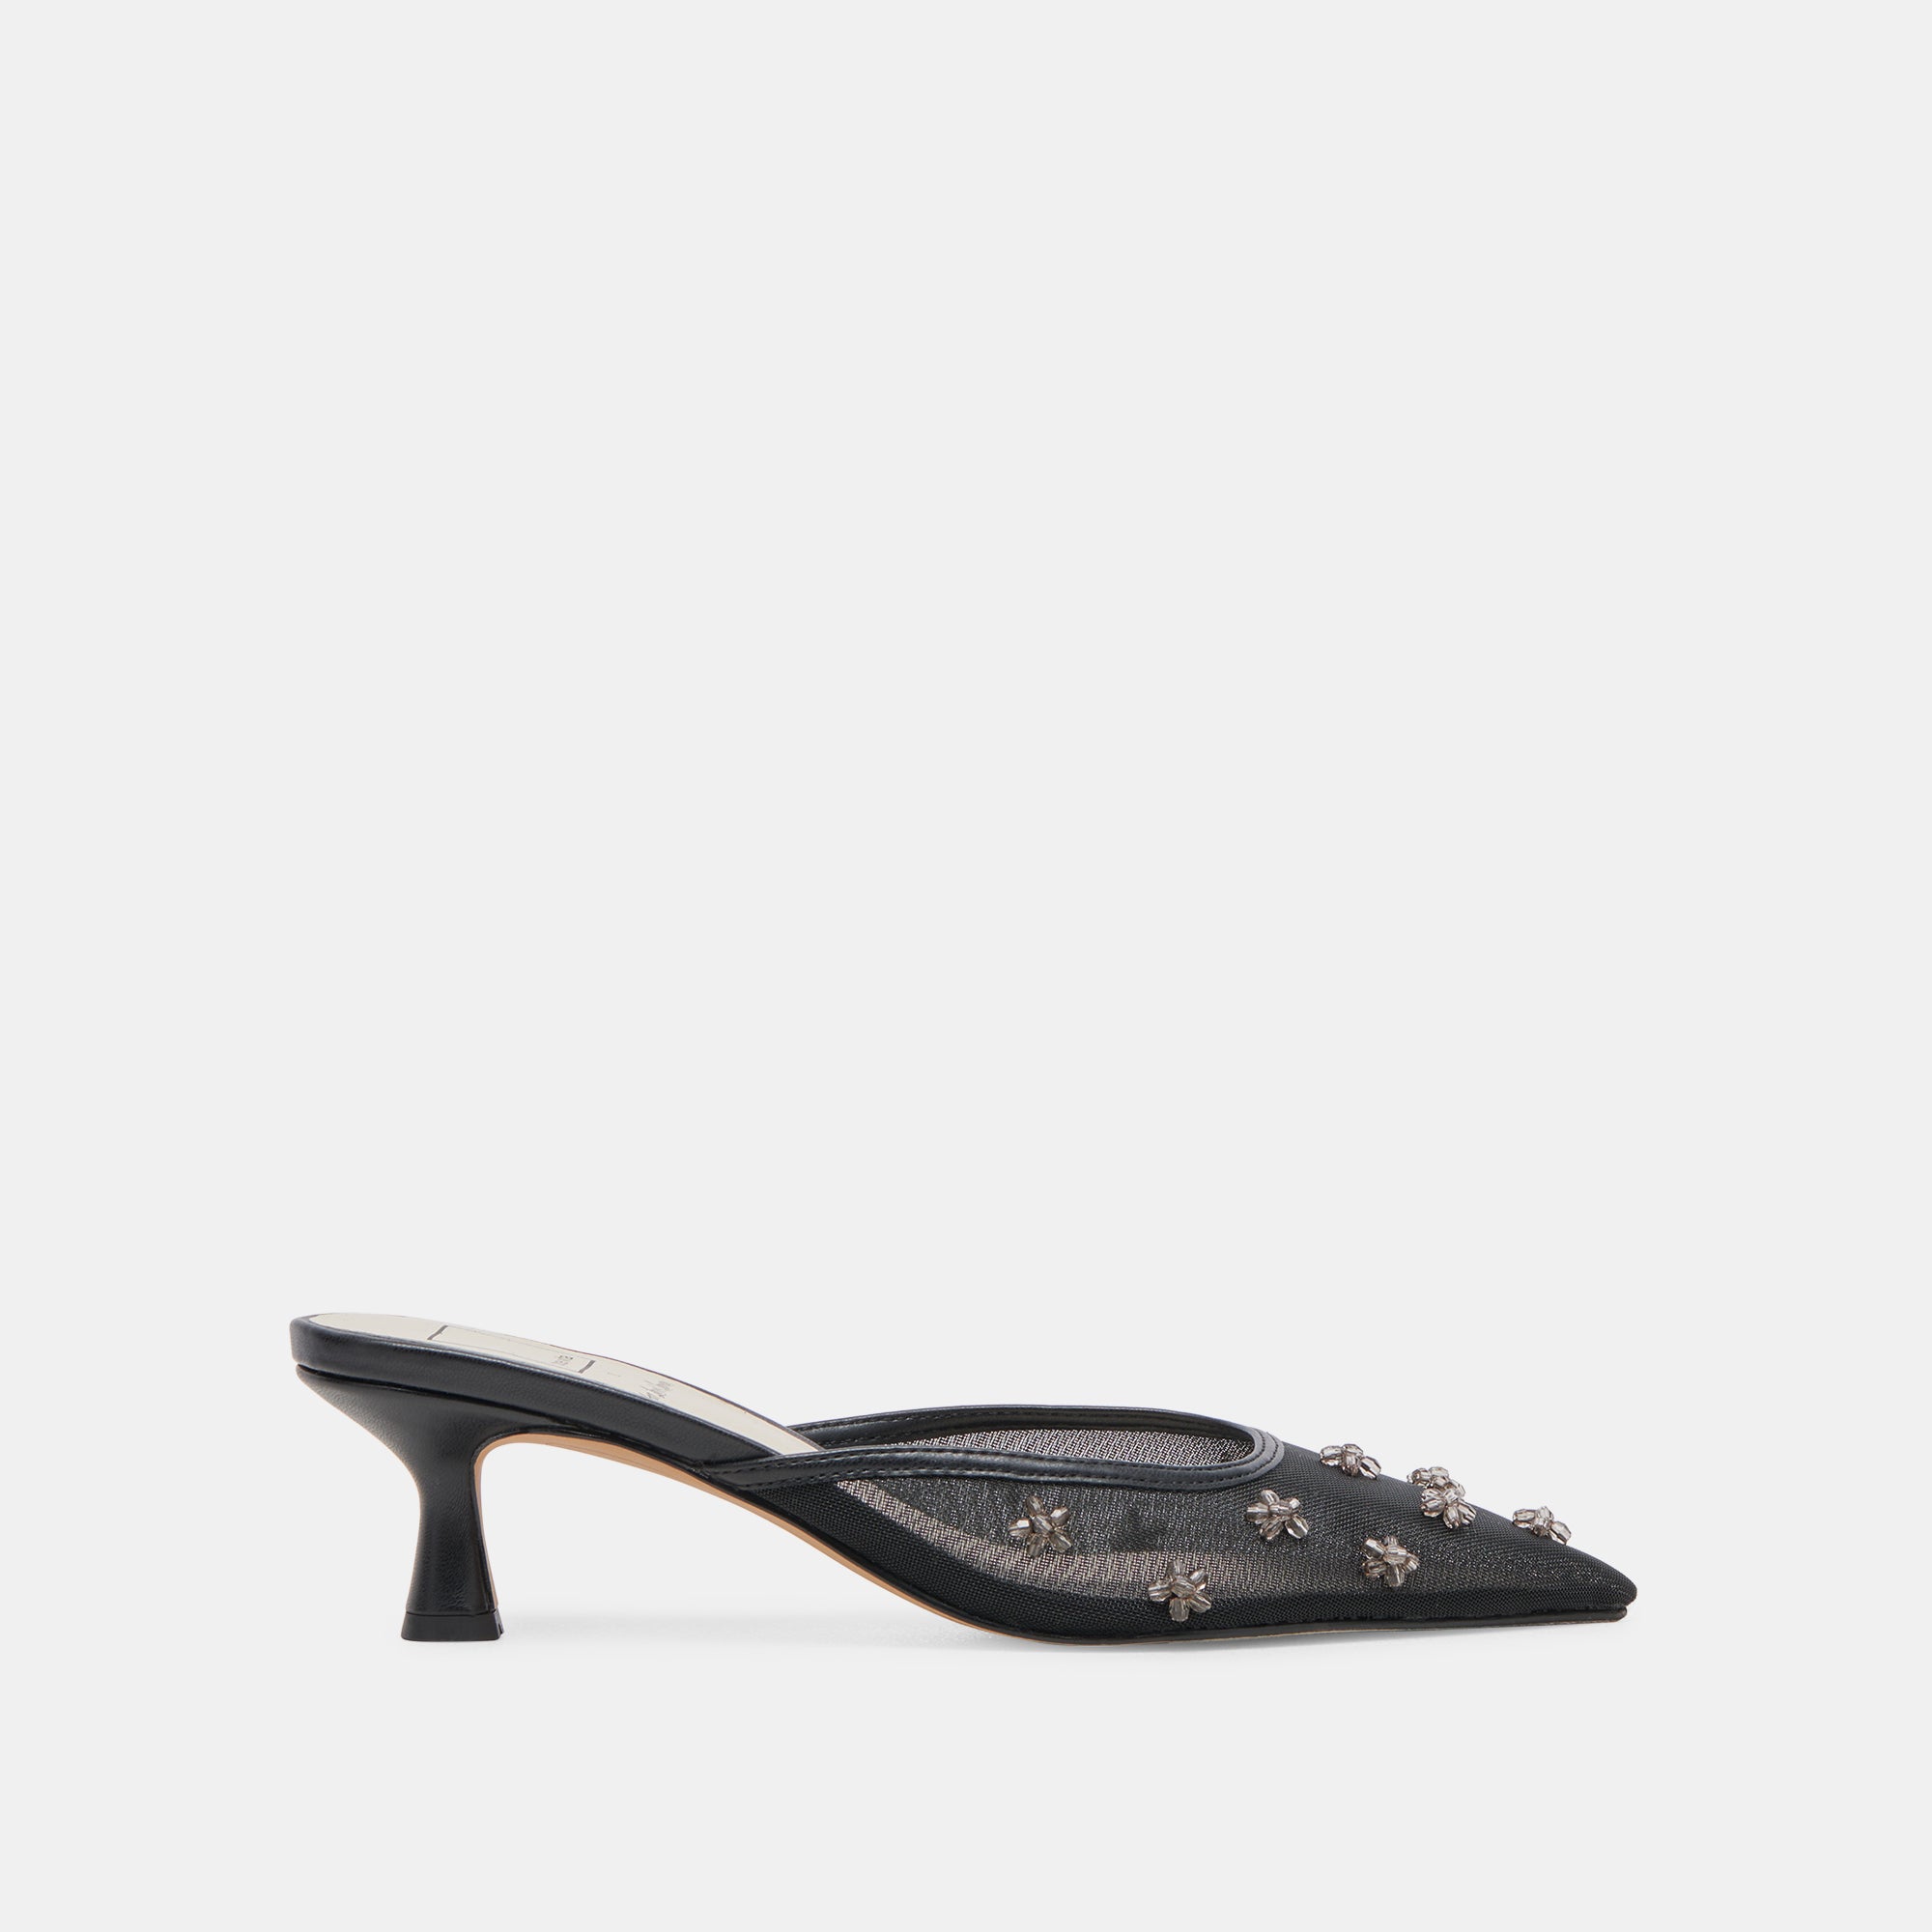 Women's Designer Pumps on Sale | The RealReal